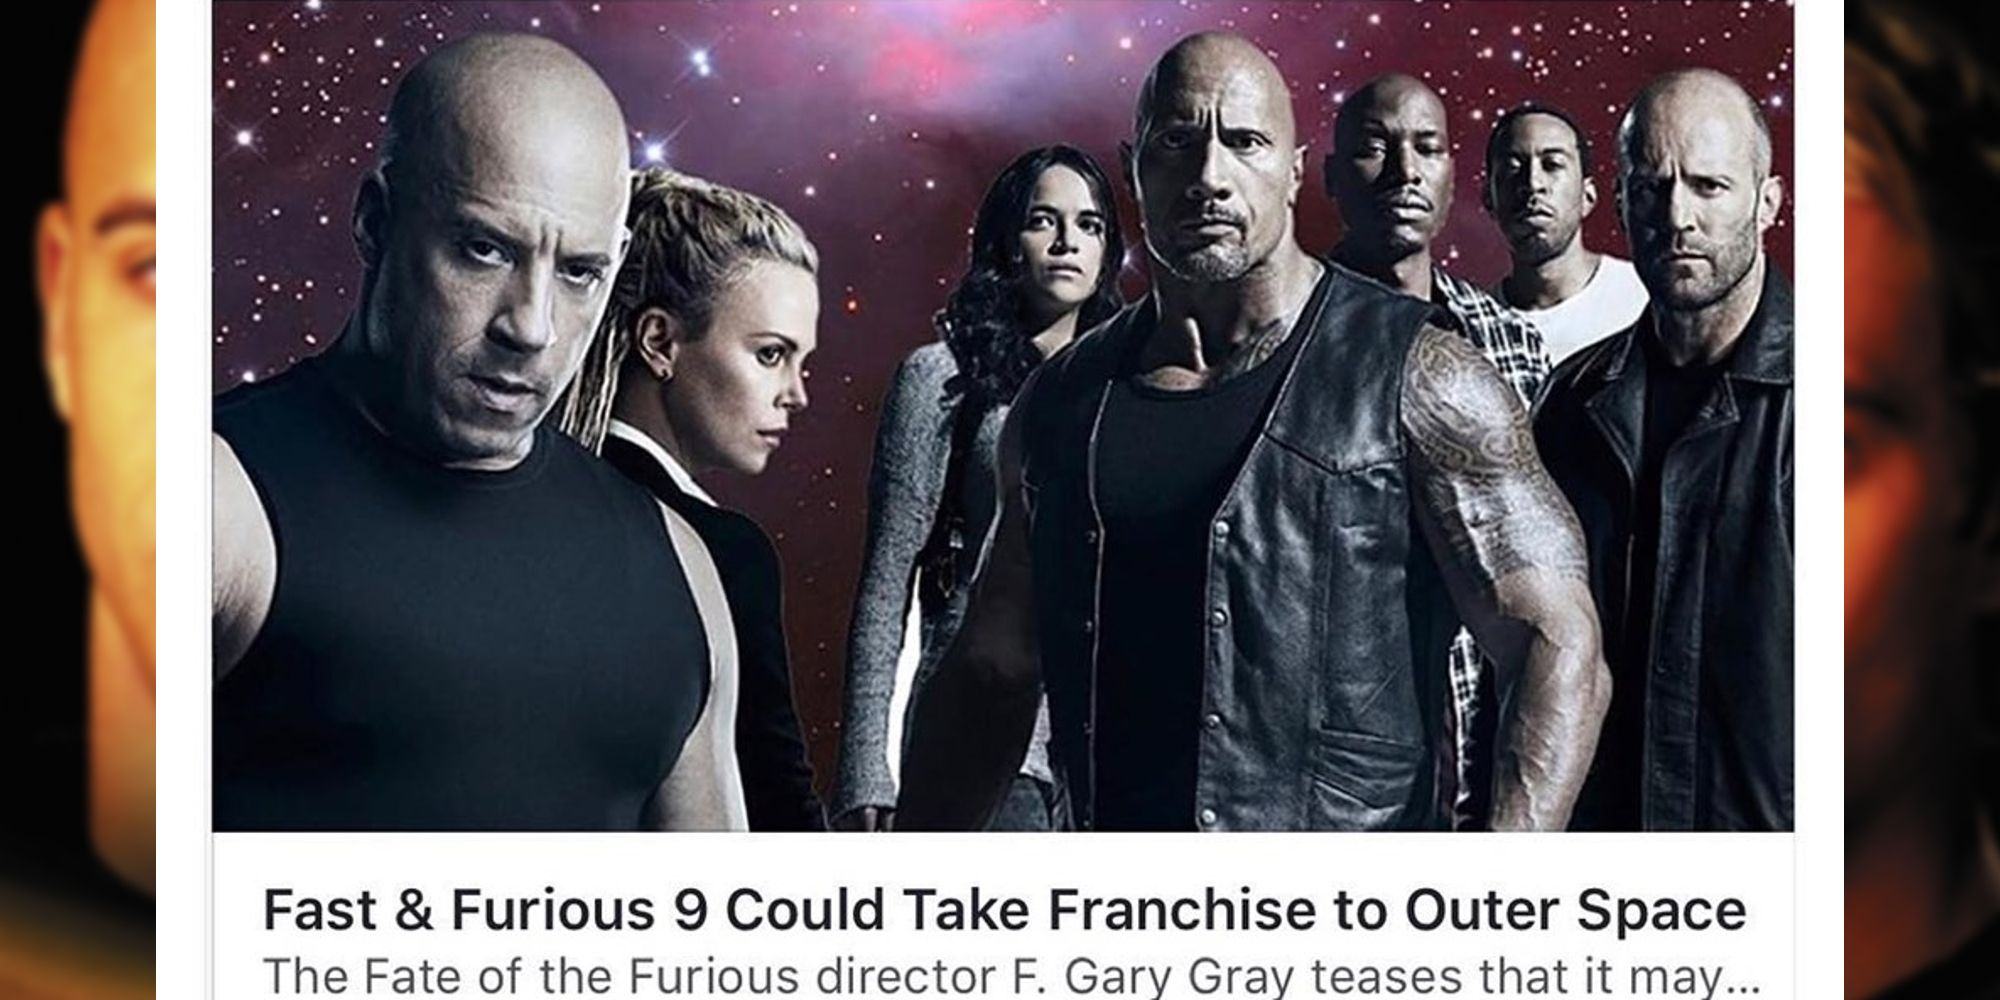 Memes about The Fast and the Furious take place in space.